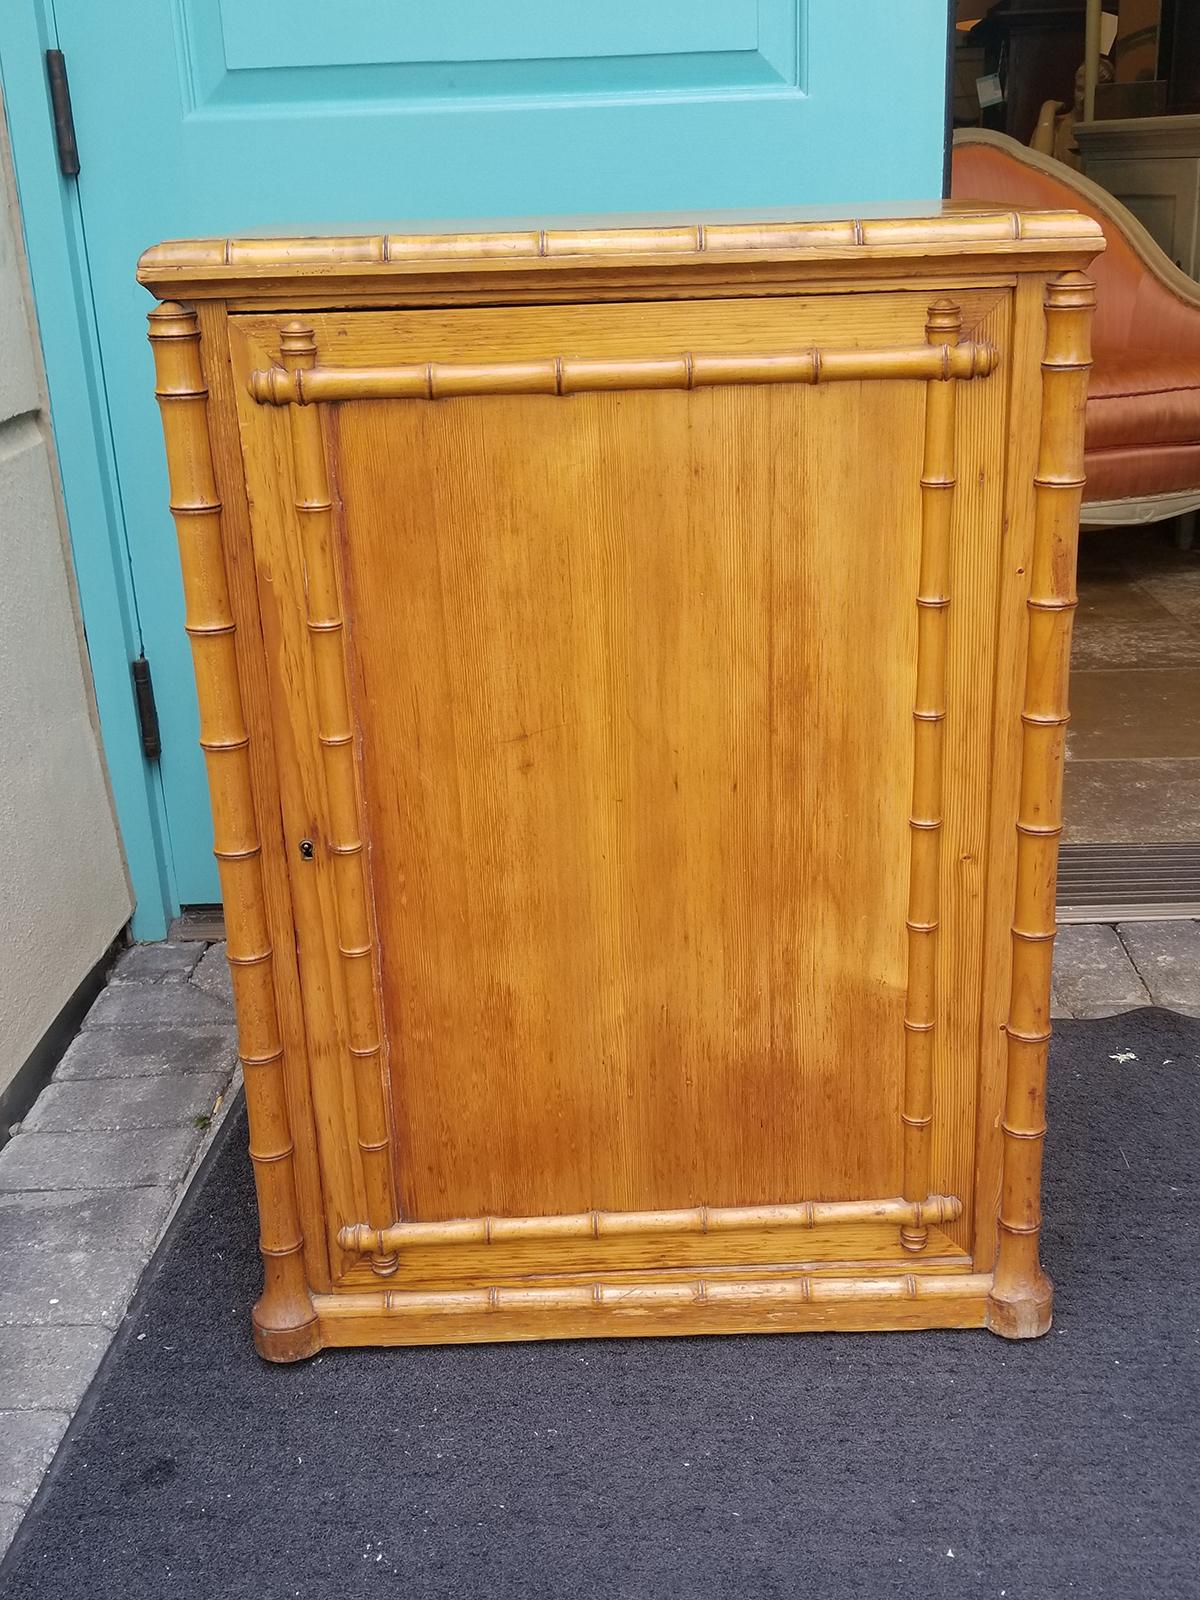 Circa 1880-1900 French bamboo style one door cabinet.